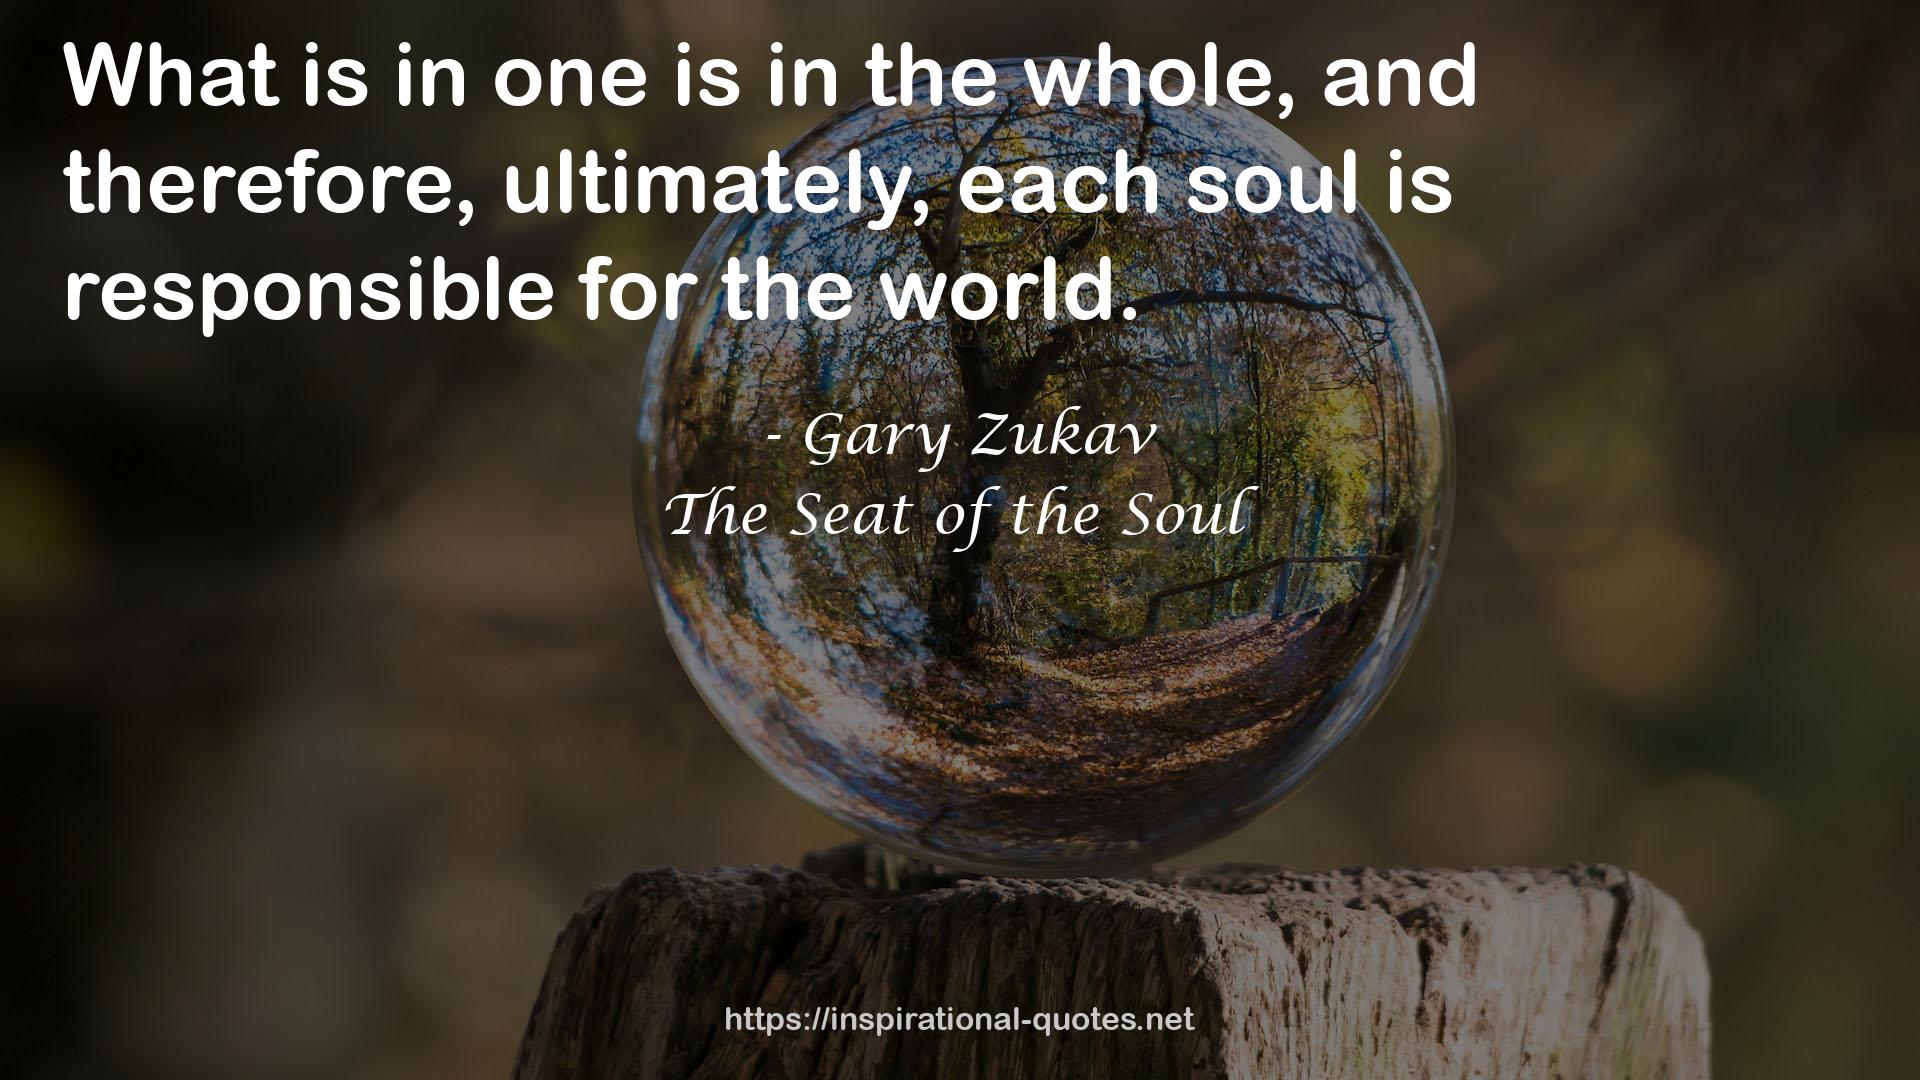 The Seat of the Soul QUOTES